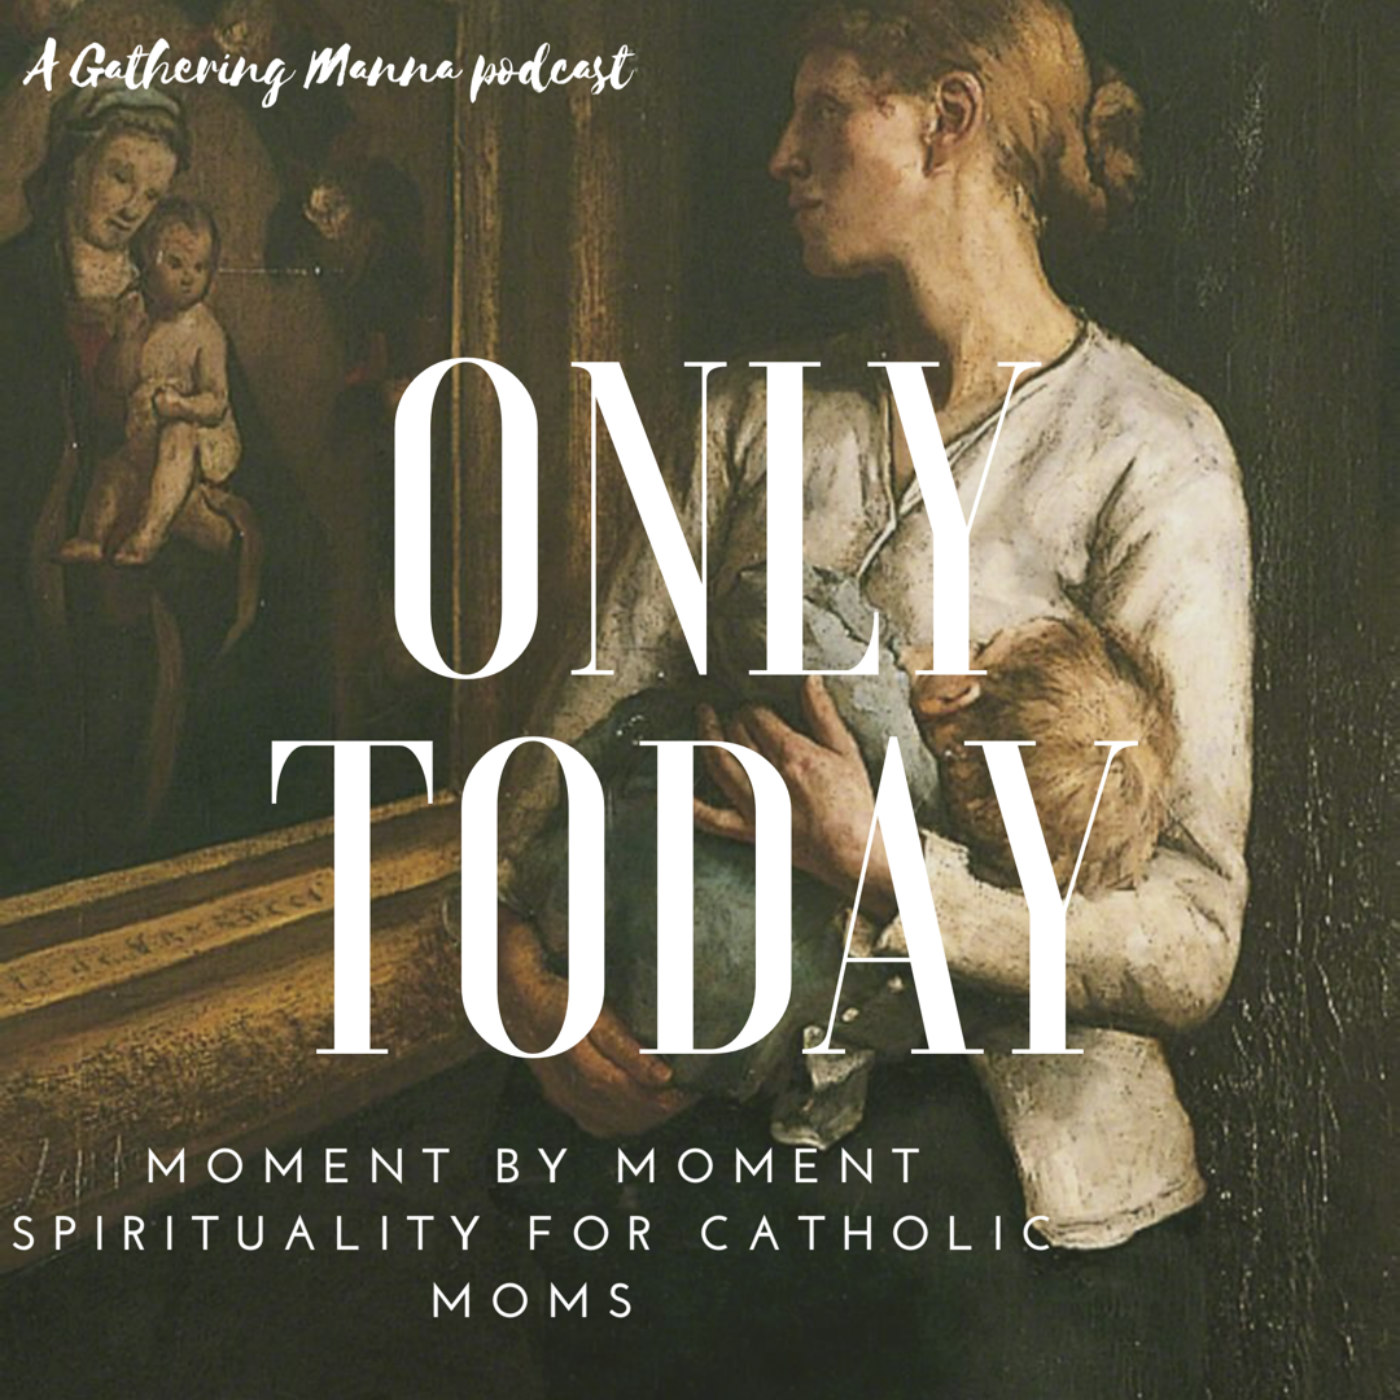 Only Today-A Gathering Manna Podcast